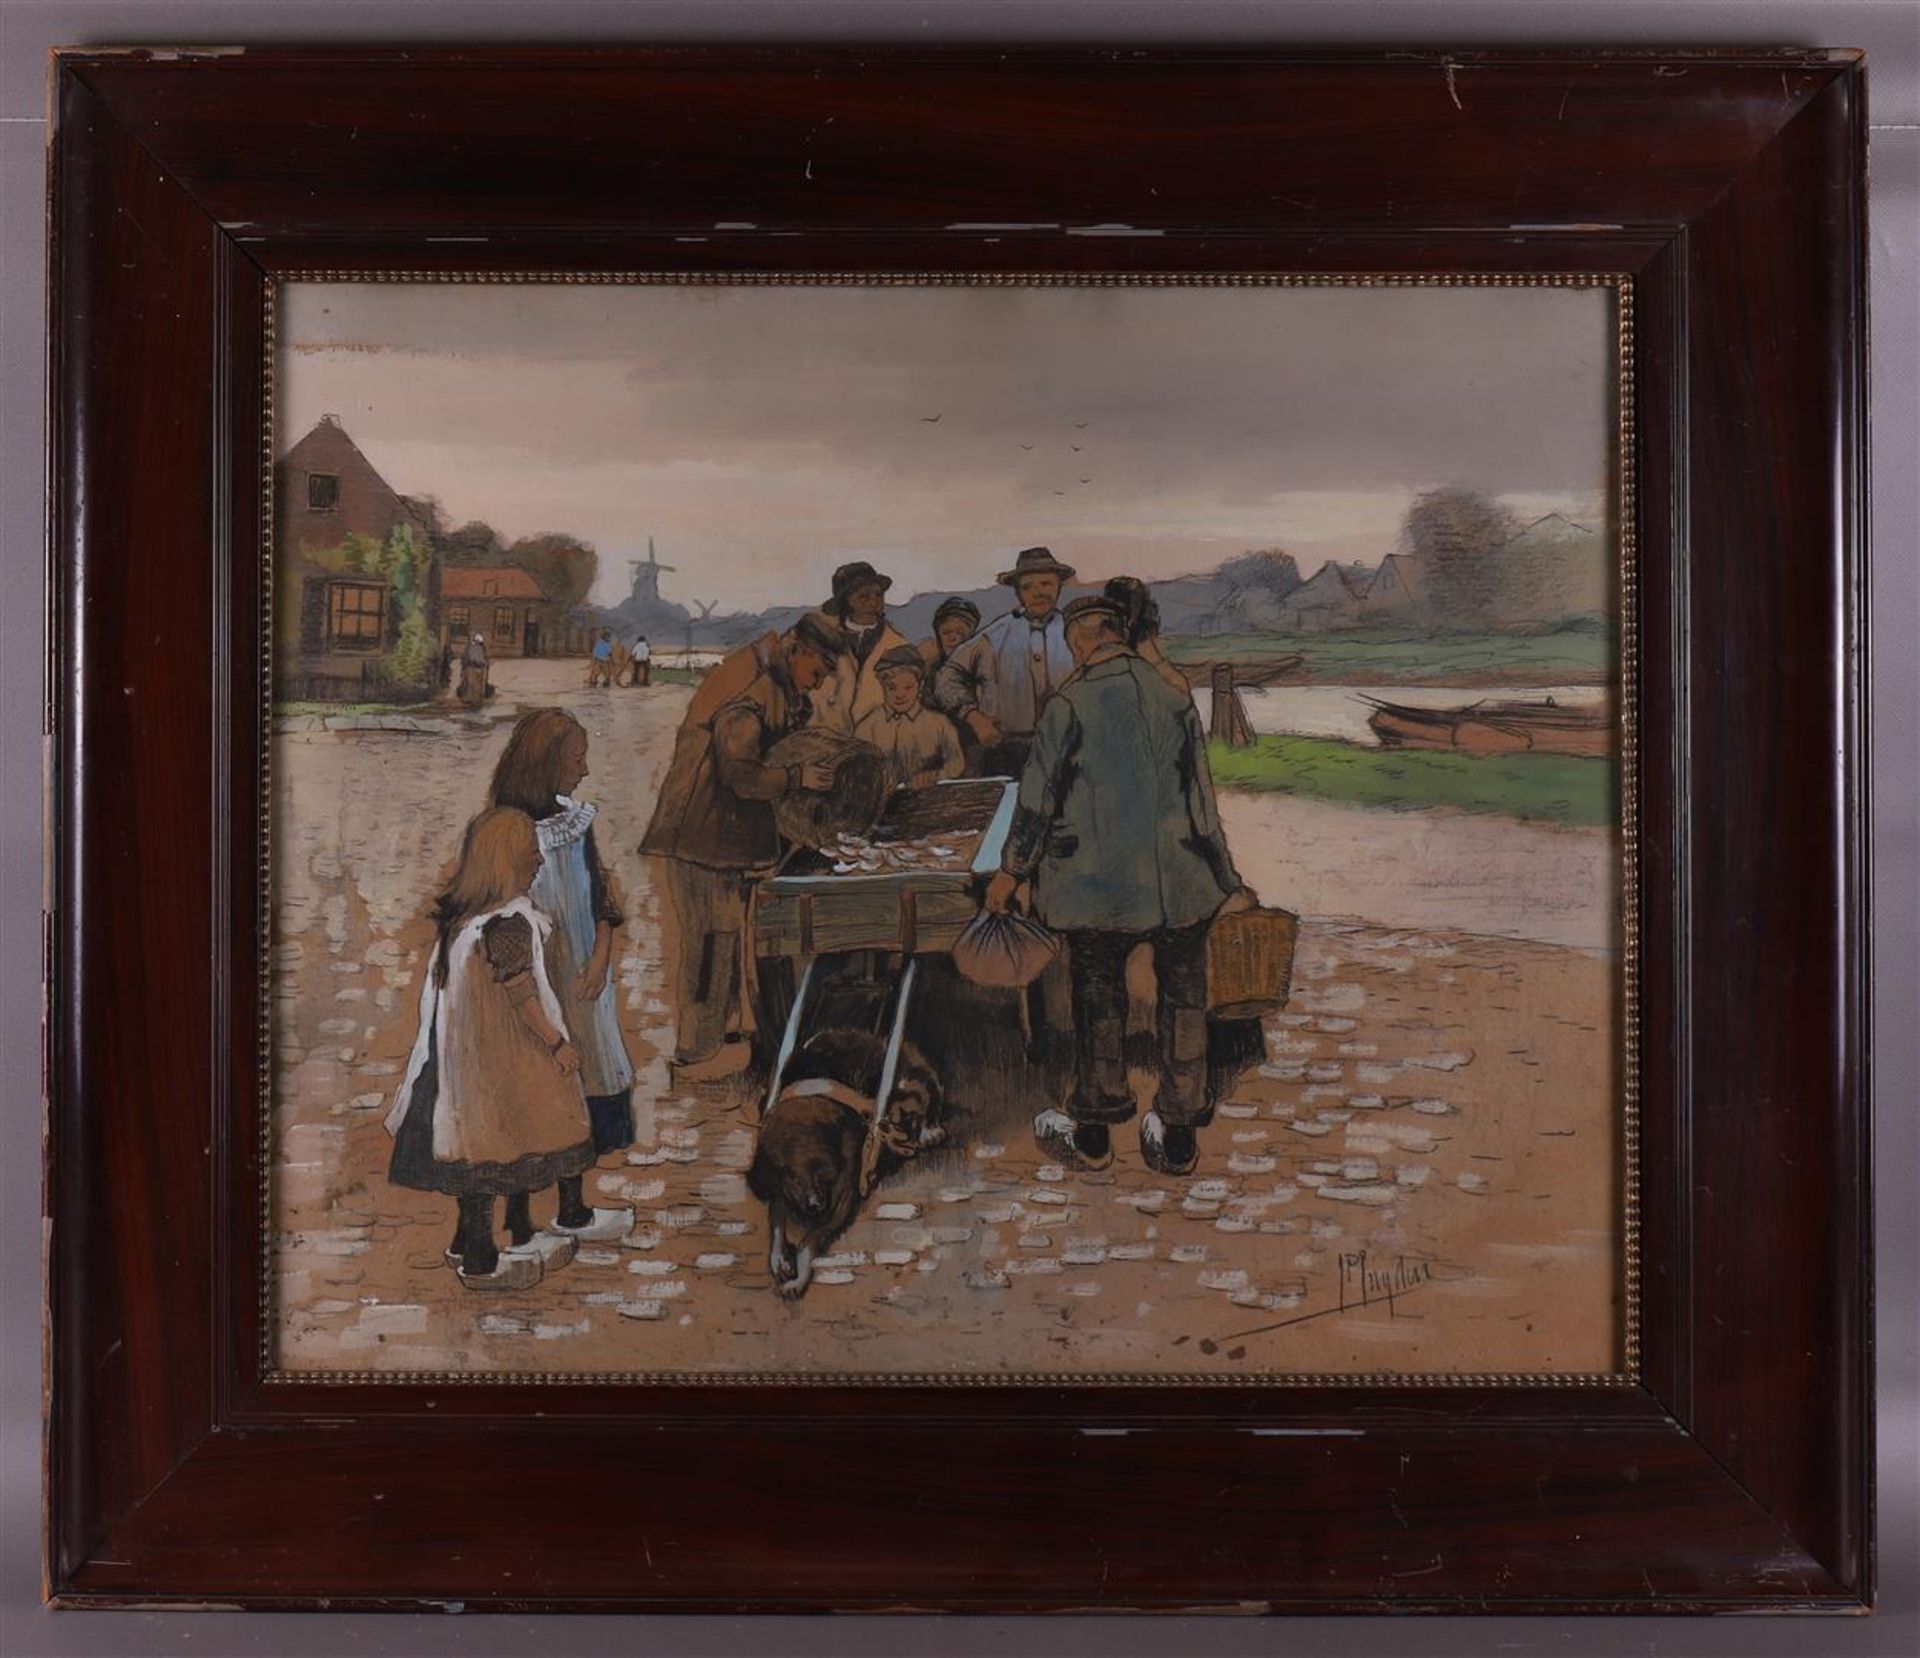 Snijders, J.P. 'Fish seller with cart',